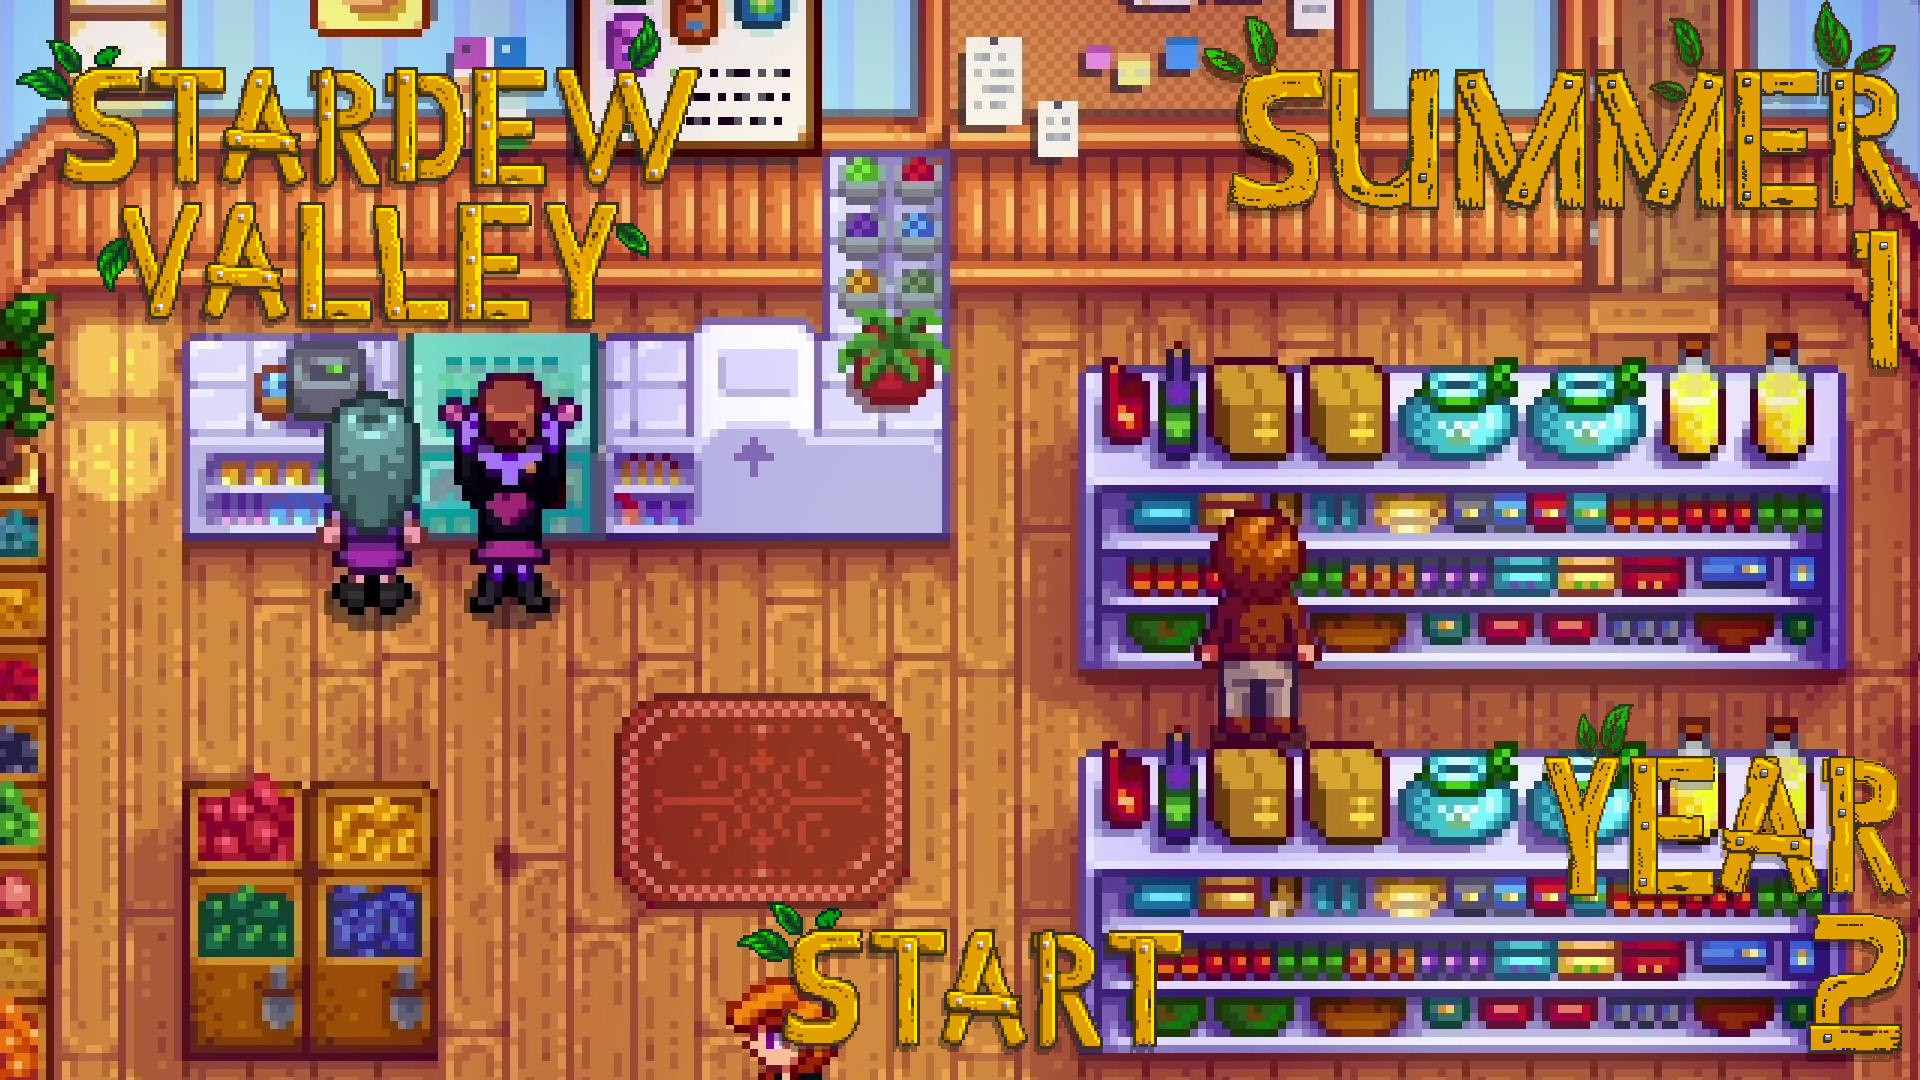 There’s No Wheat in Wheaties – Stardew Valley, Summer 1, Year 2, Start